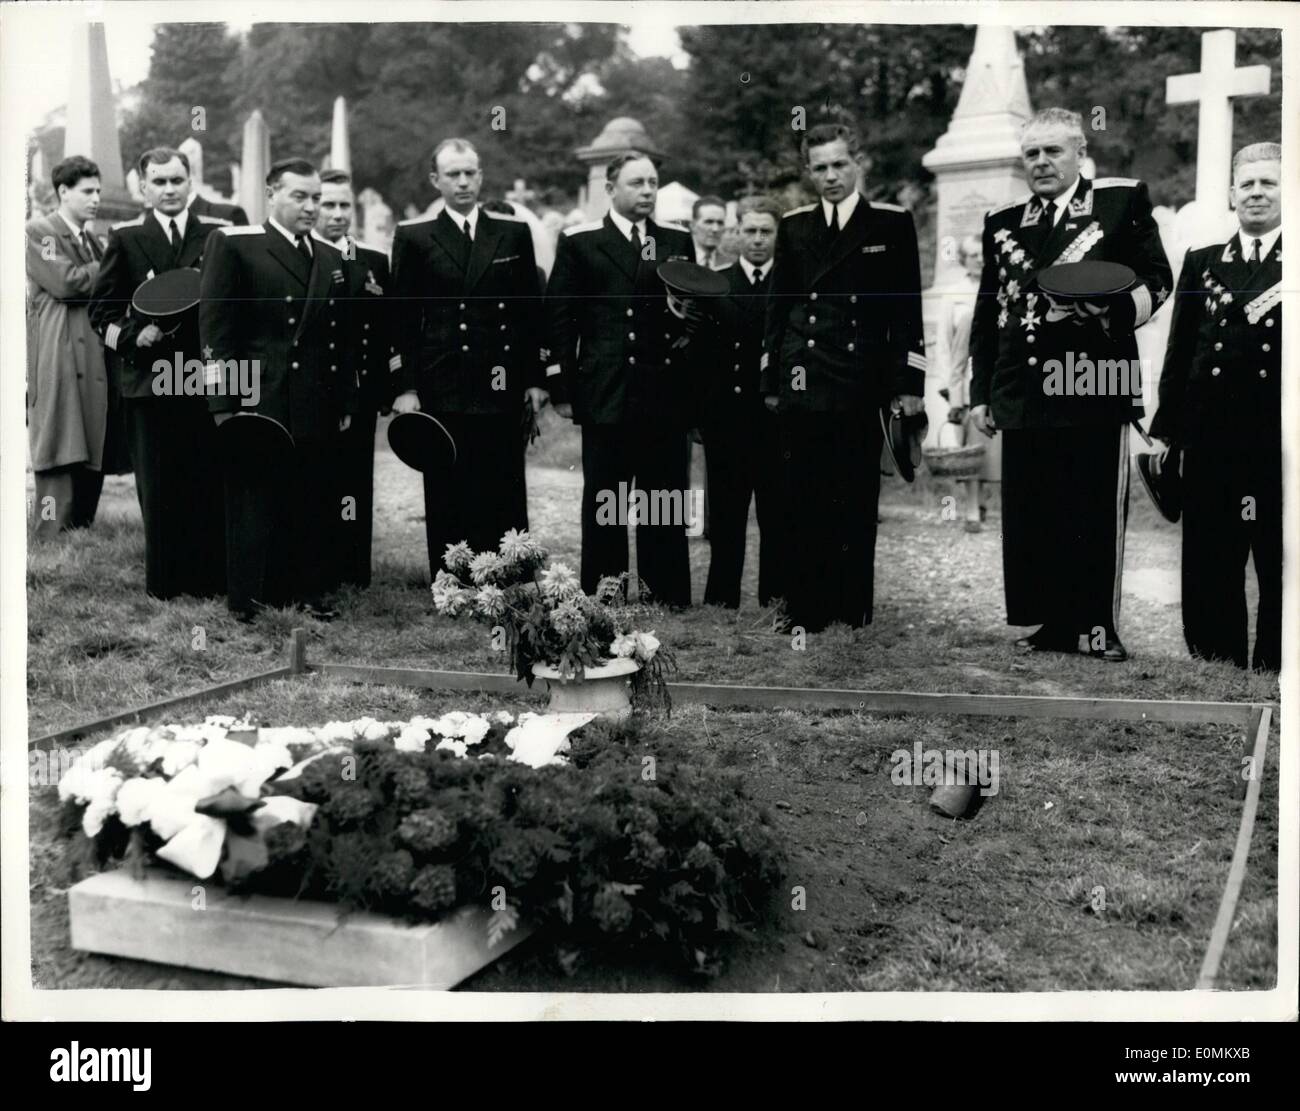 Oct. 10, 1955 - Russian Naval Officers visit Karl Marx tomb in London. Six Russian warships arrived yesterday at Portermouth on a five-day goodwill visit and this morning, Admiral A.G. Golovko, Commander in Chief of the Soviet Baltic Fleet, and a party of senior staff officers, who arrived in London this morning paid a visit to the Karl Marx tom at Highgate. Keystone Photo Shows: Admiral A.G. Golovko (second from right), bares his head, along with other officers after a wreath had been laidn on the tomb of Karl Marx at Highgate today. H/Keystone Stock Photo